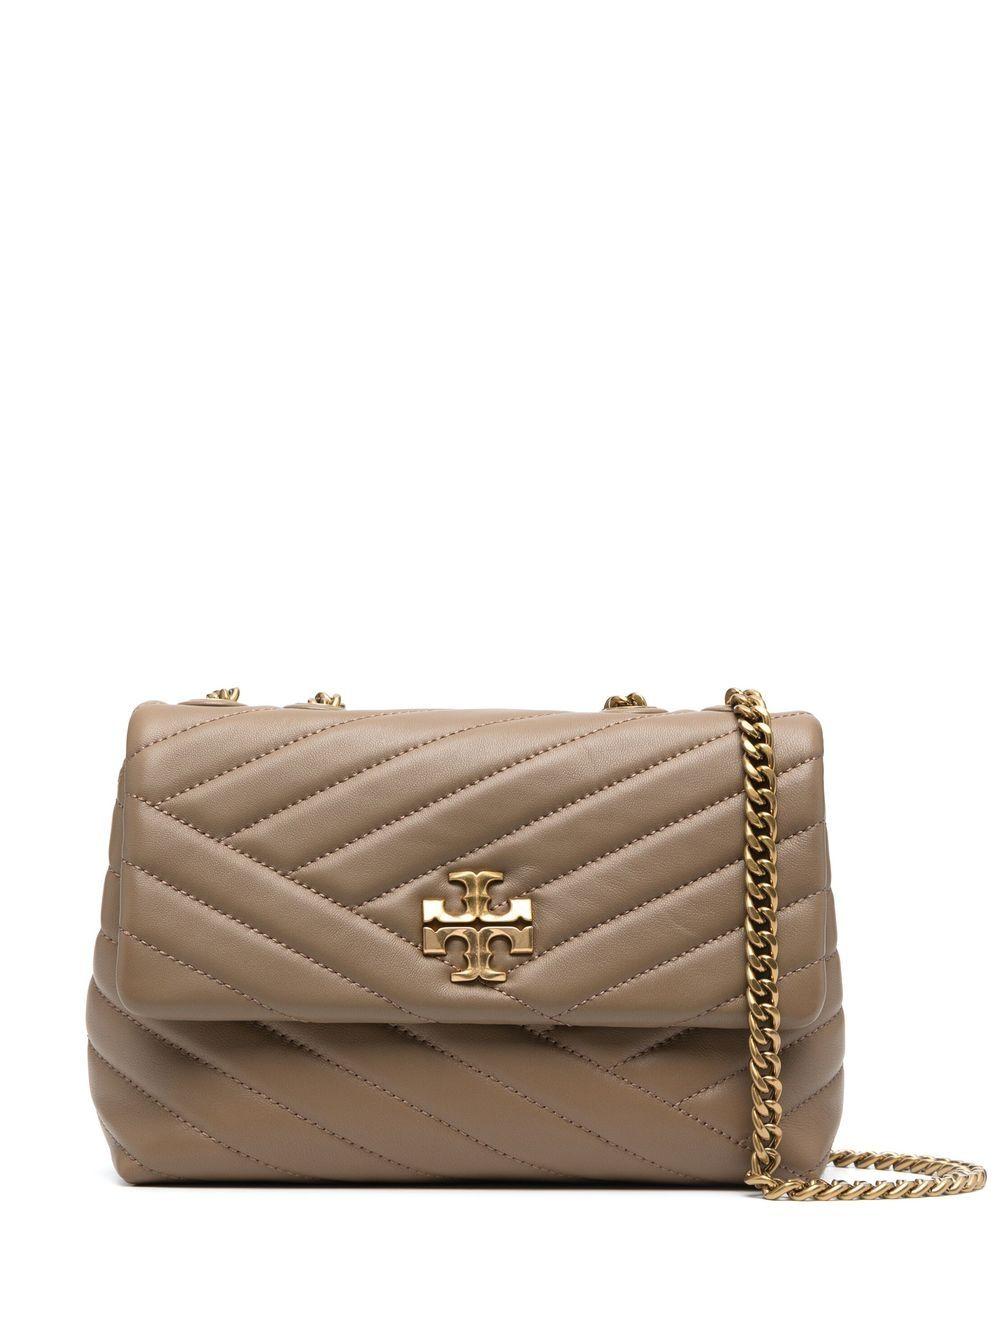 Tory Burch Kira Quilted Crossbody Bag in Brown | Lyst